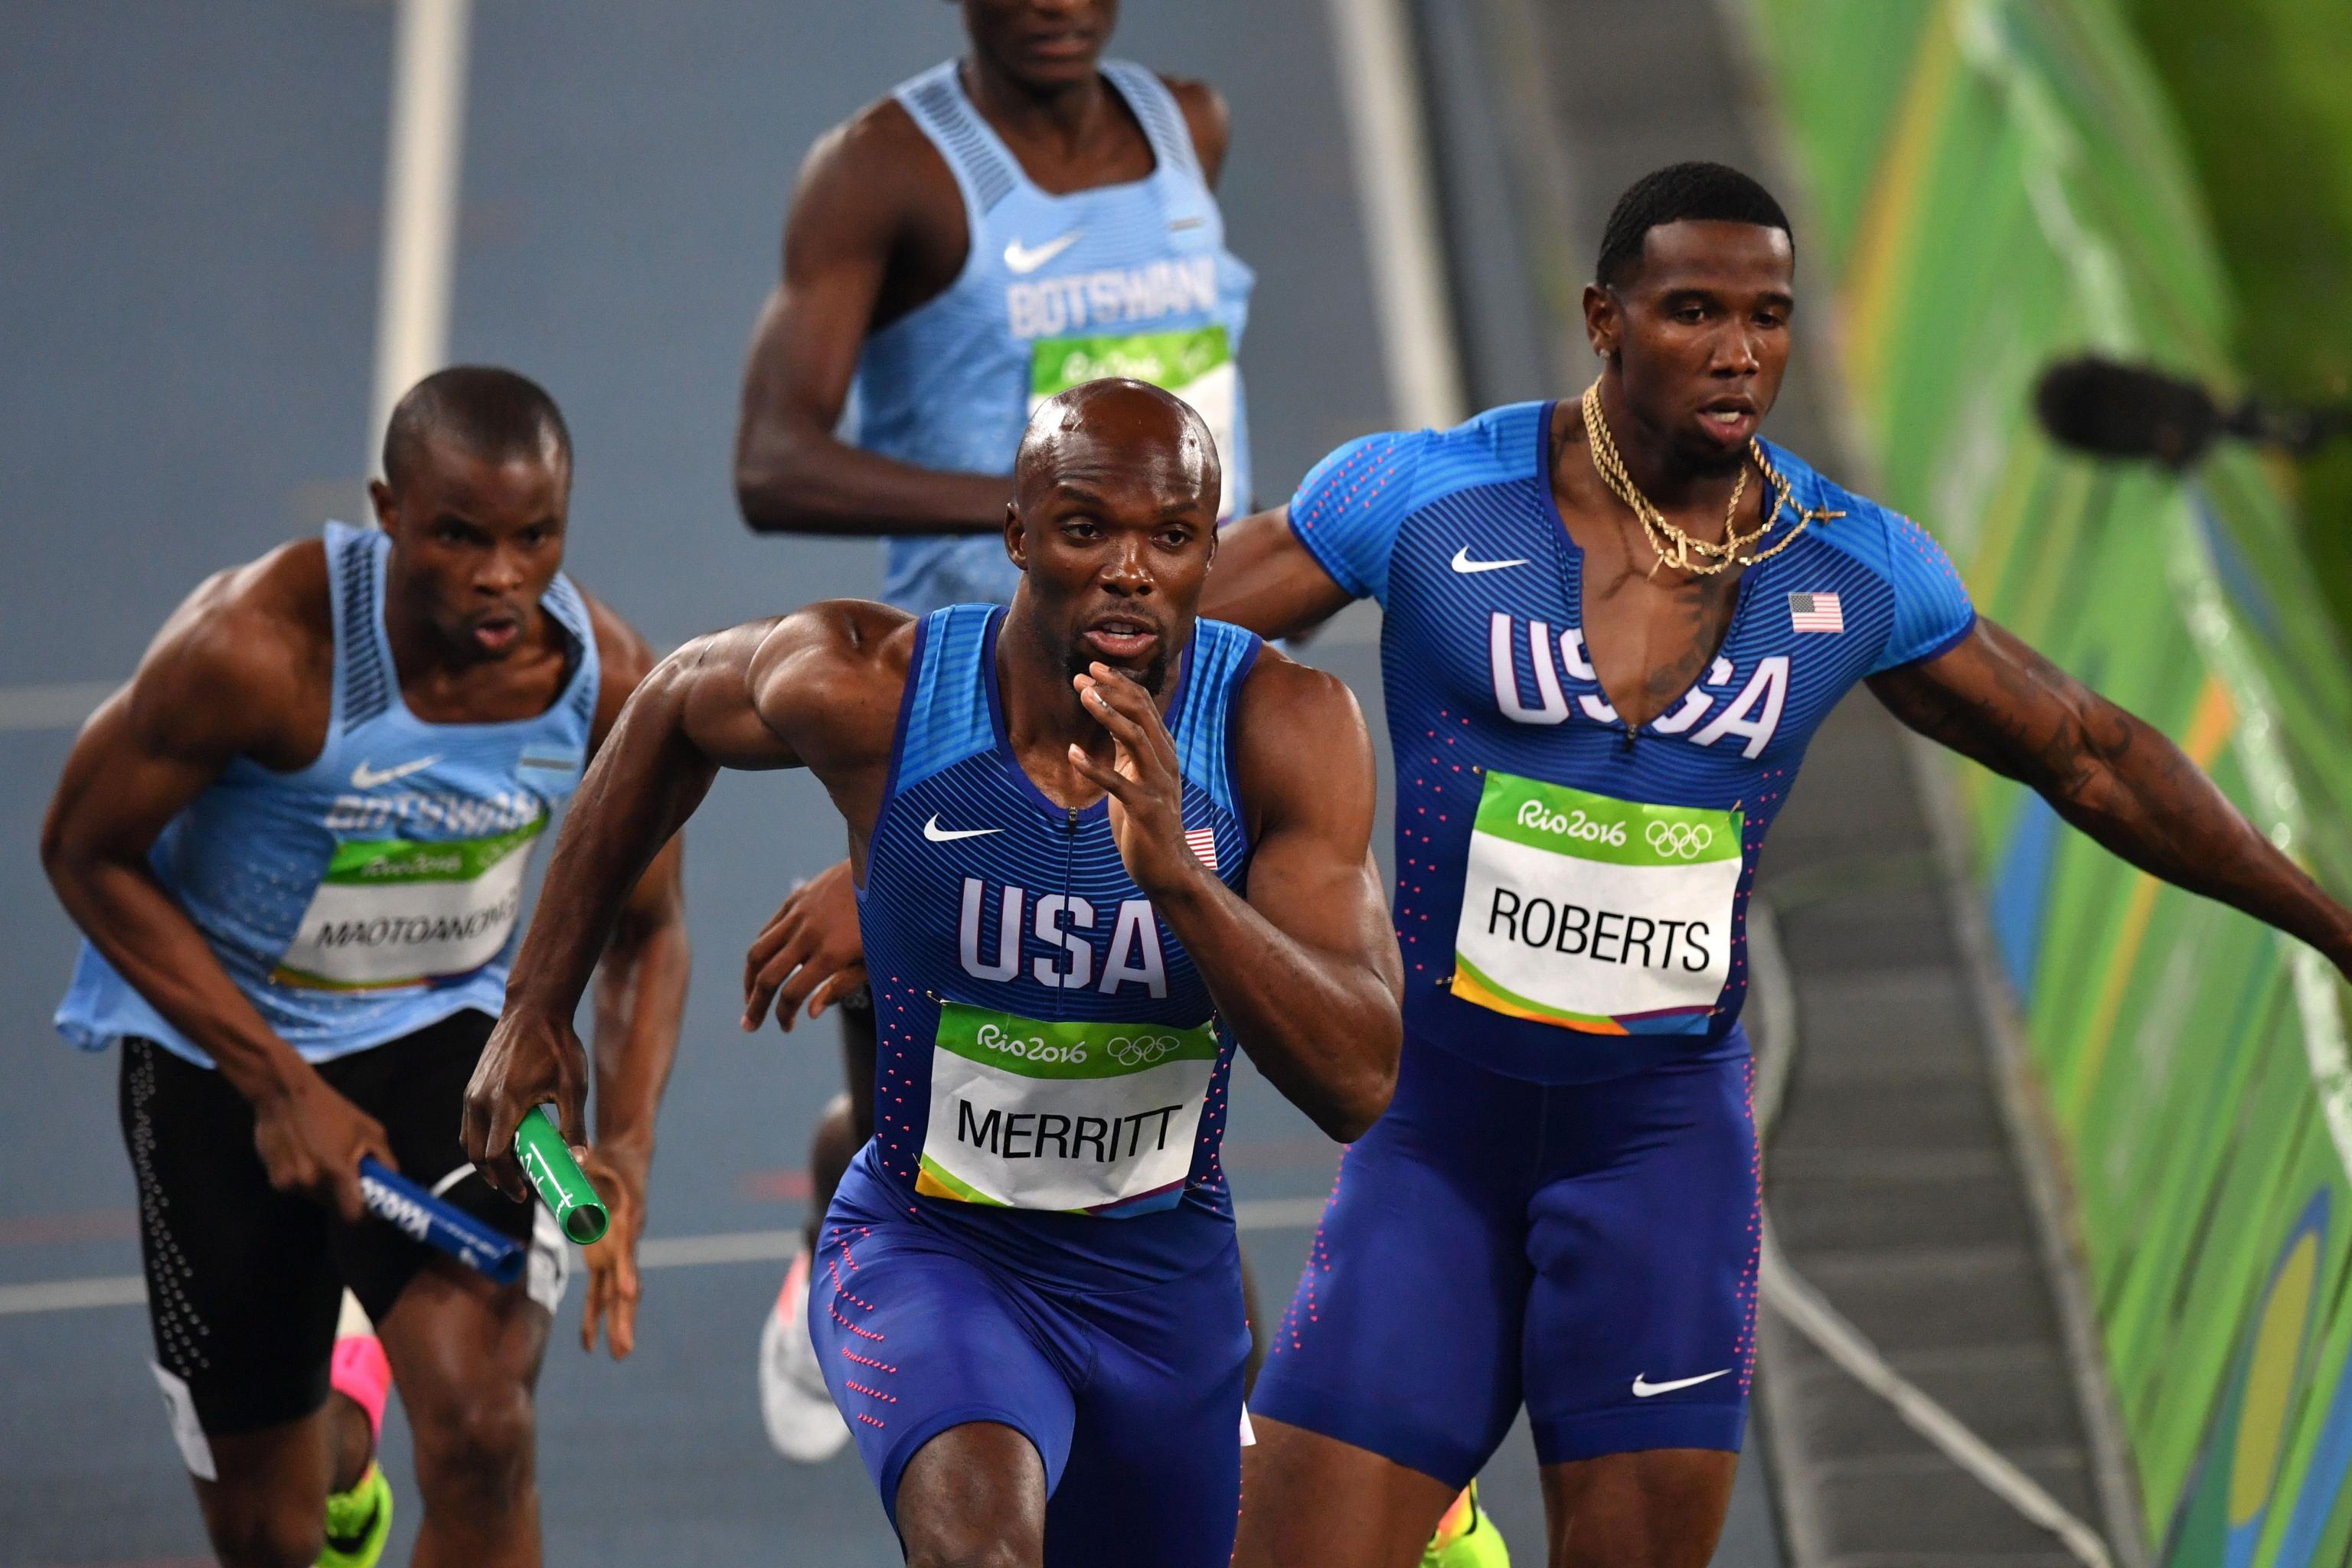 Olympic Track And Field 16 Men S 4x400m Relay Winners Times And Results Bleacher Report Latest News Videos And Highlights